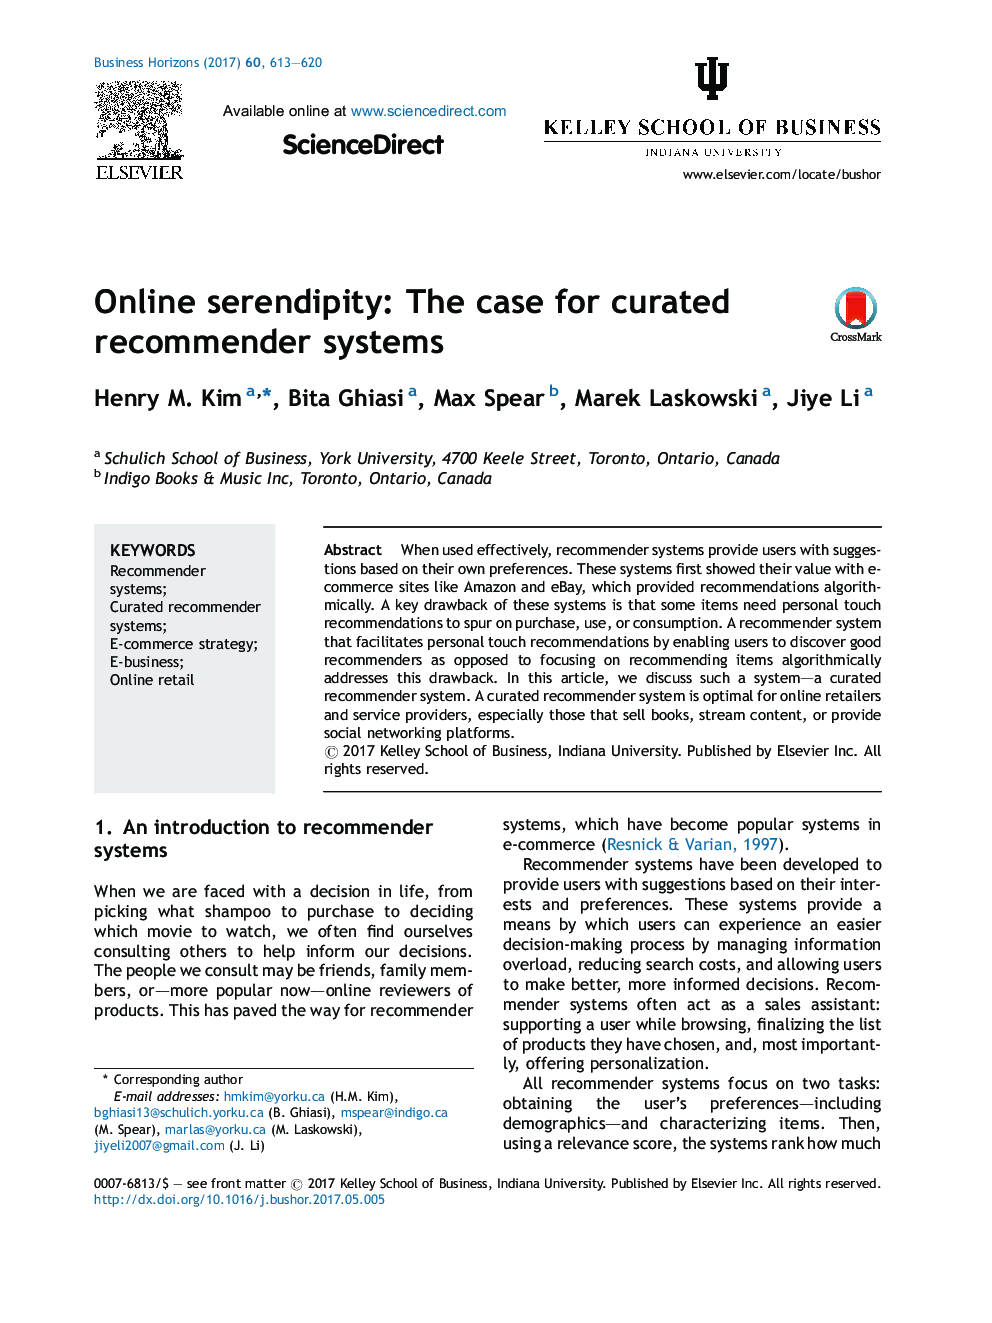 Online serendipity: The case for curated recommender systems